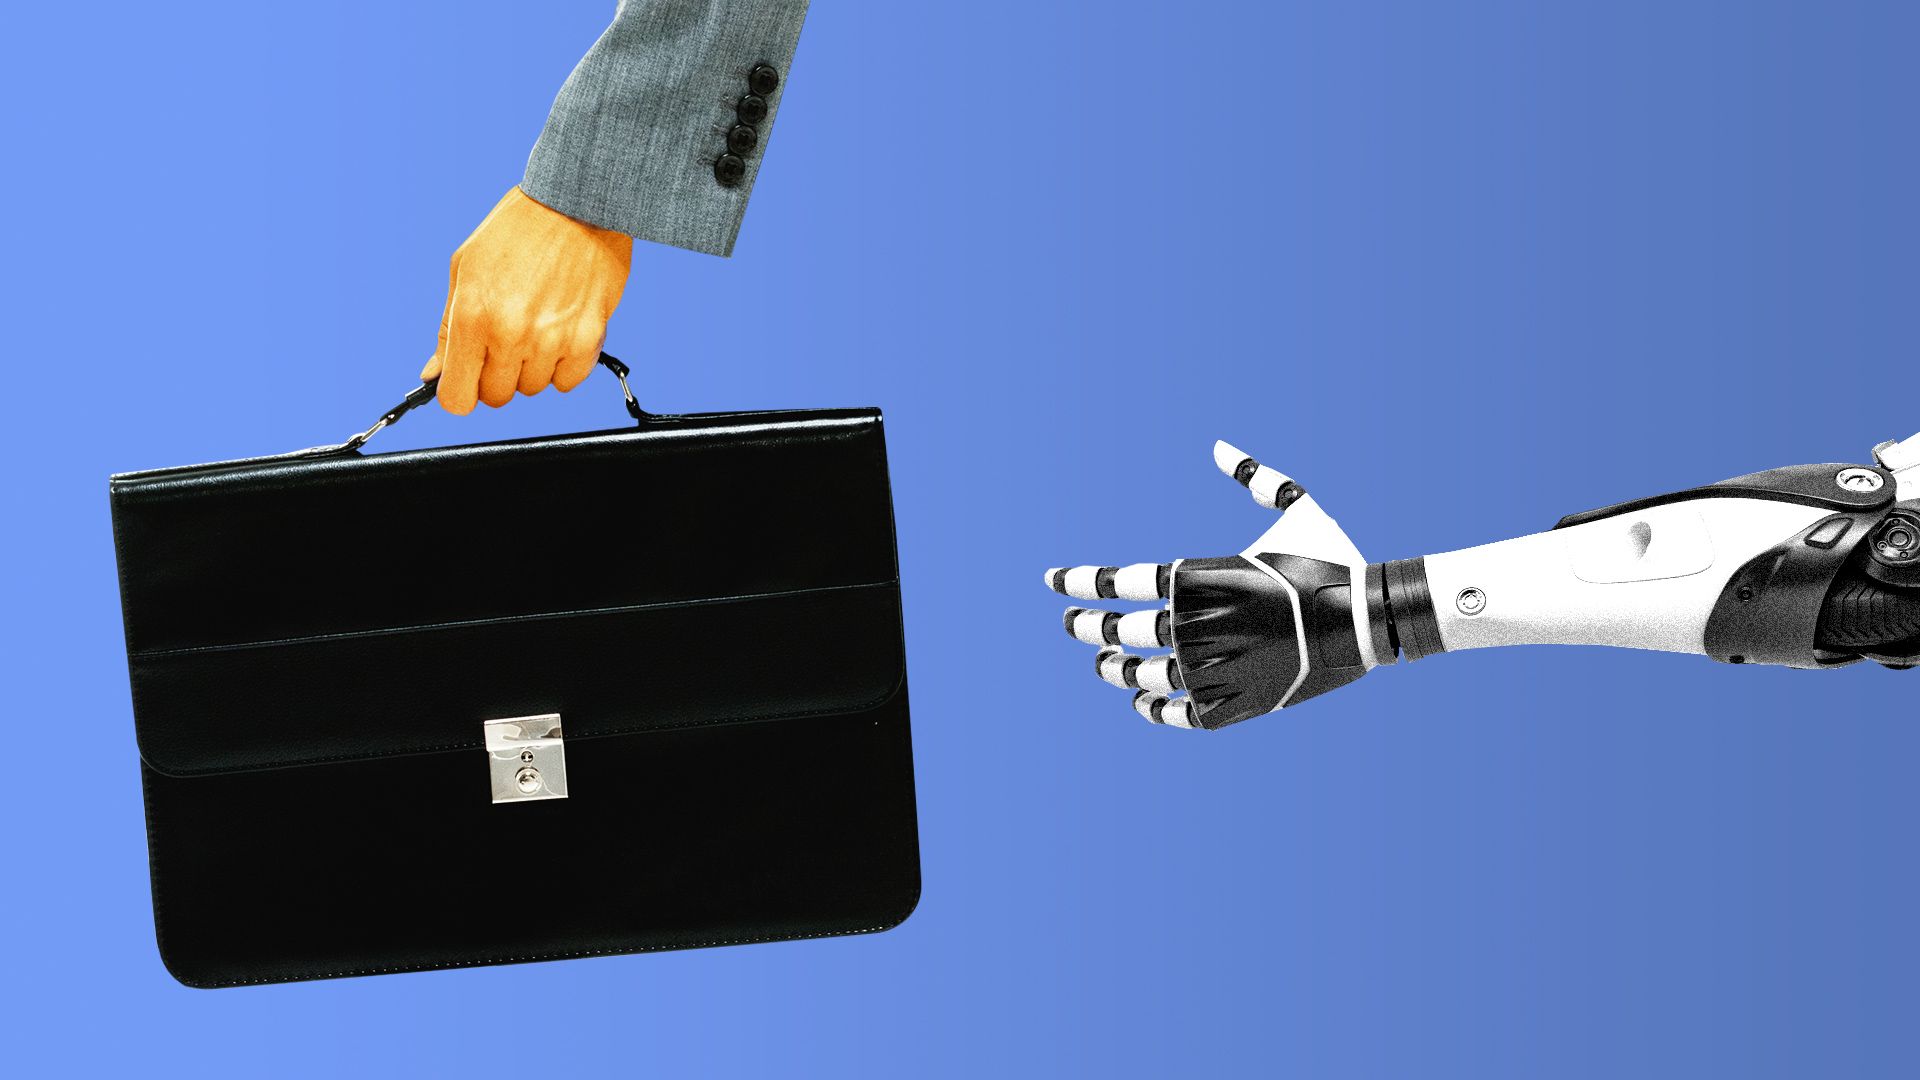 Illustration of a woman holding a briefcase with a robot hand reaching out to grab it from behind.